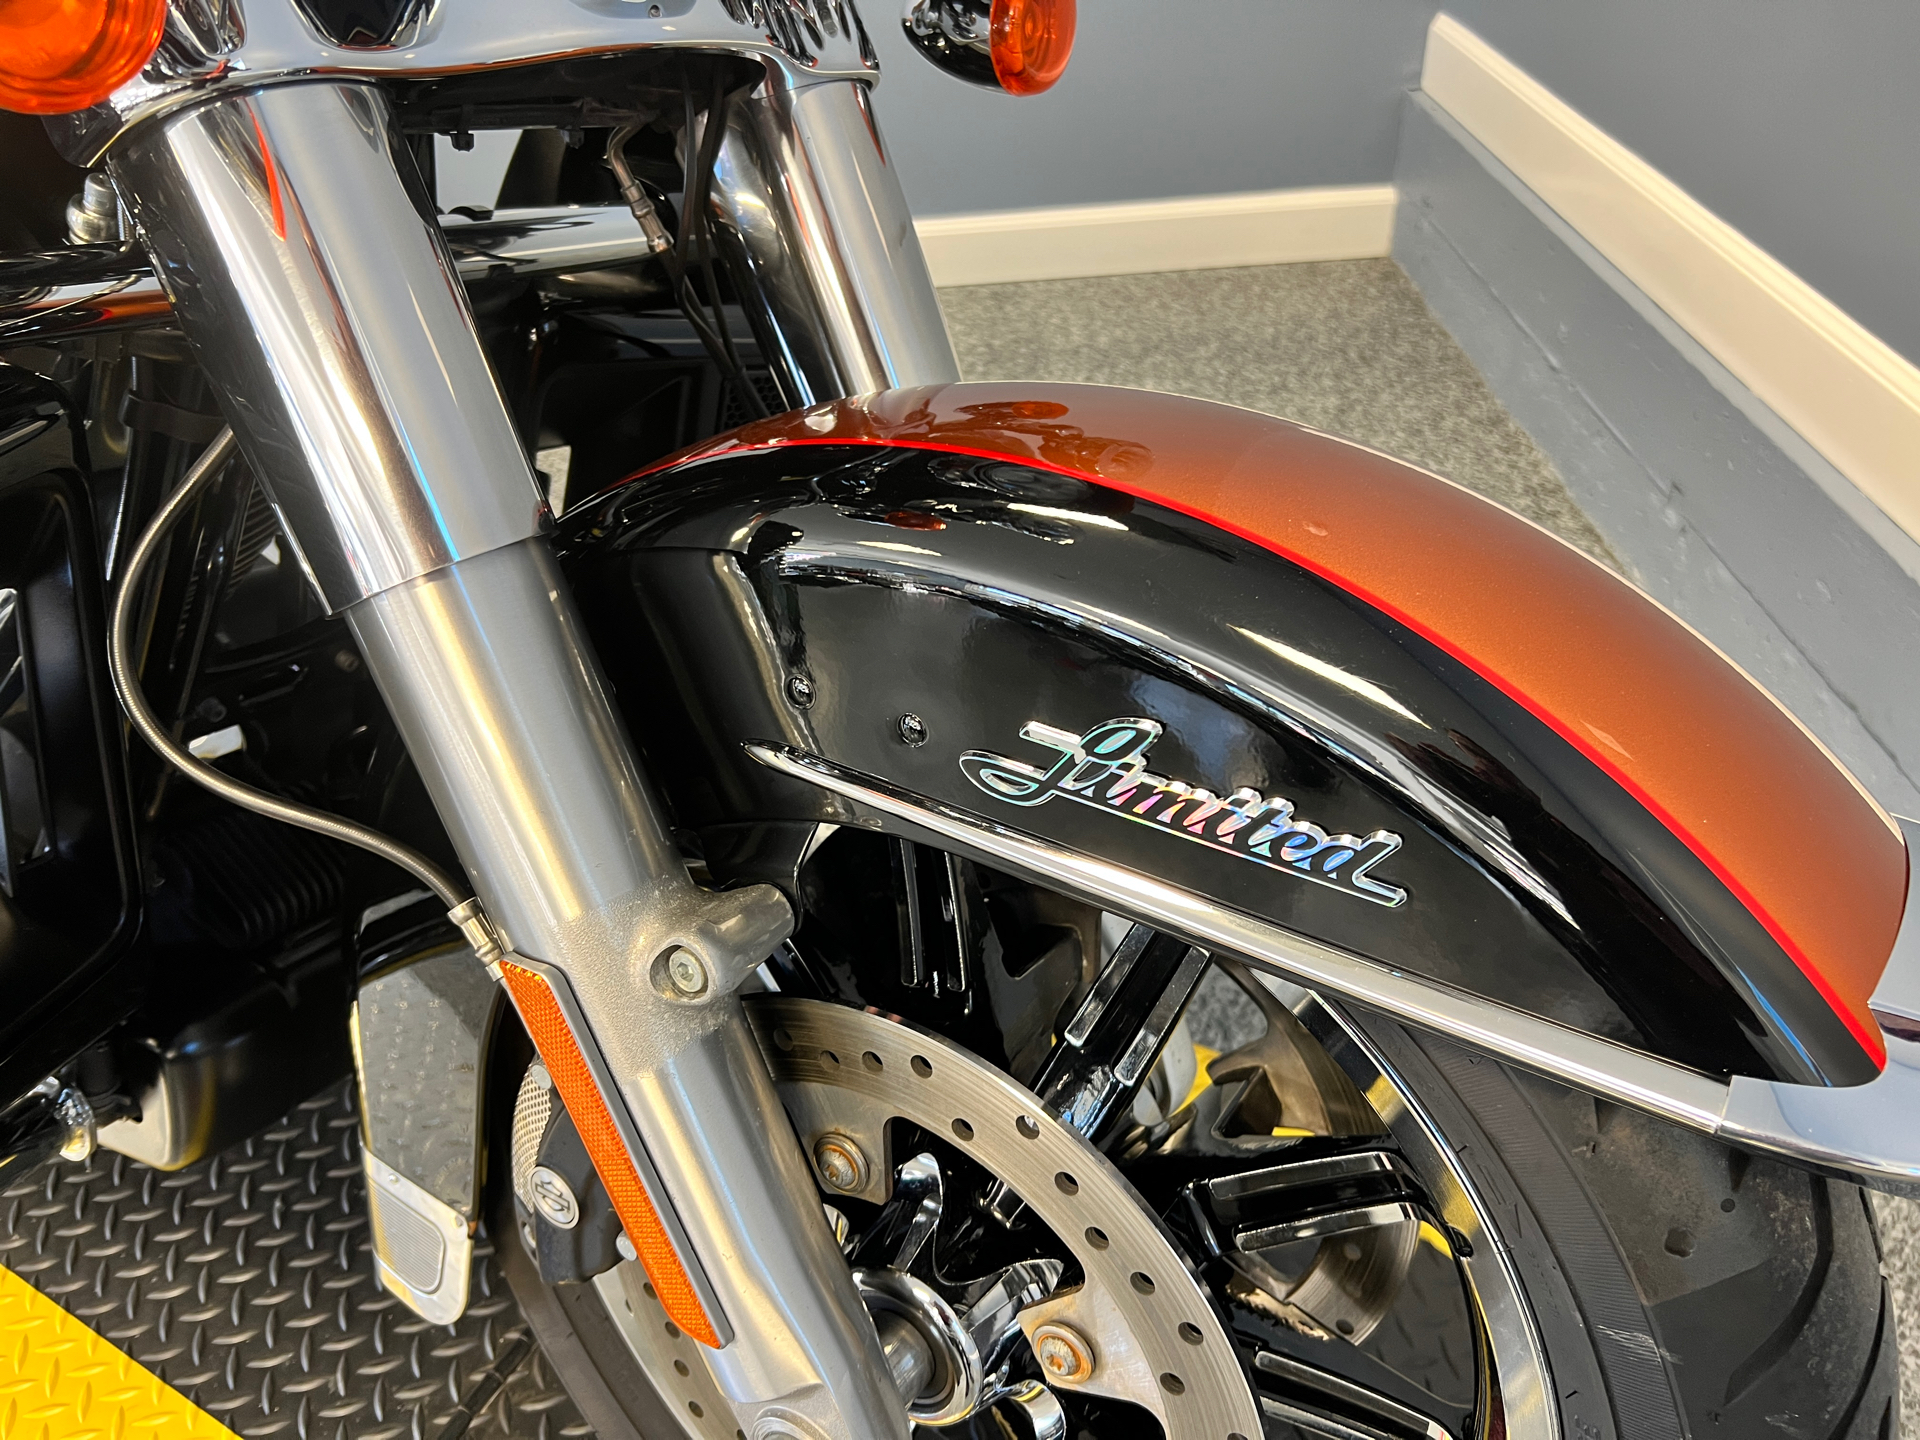 2016 Harley-Davidson Ultra Limited in Meredith, New Hampshire - Photo 3